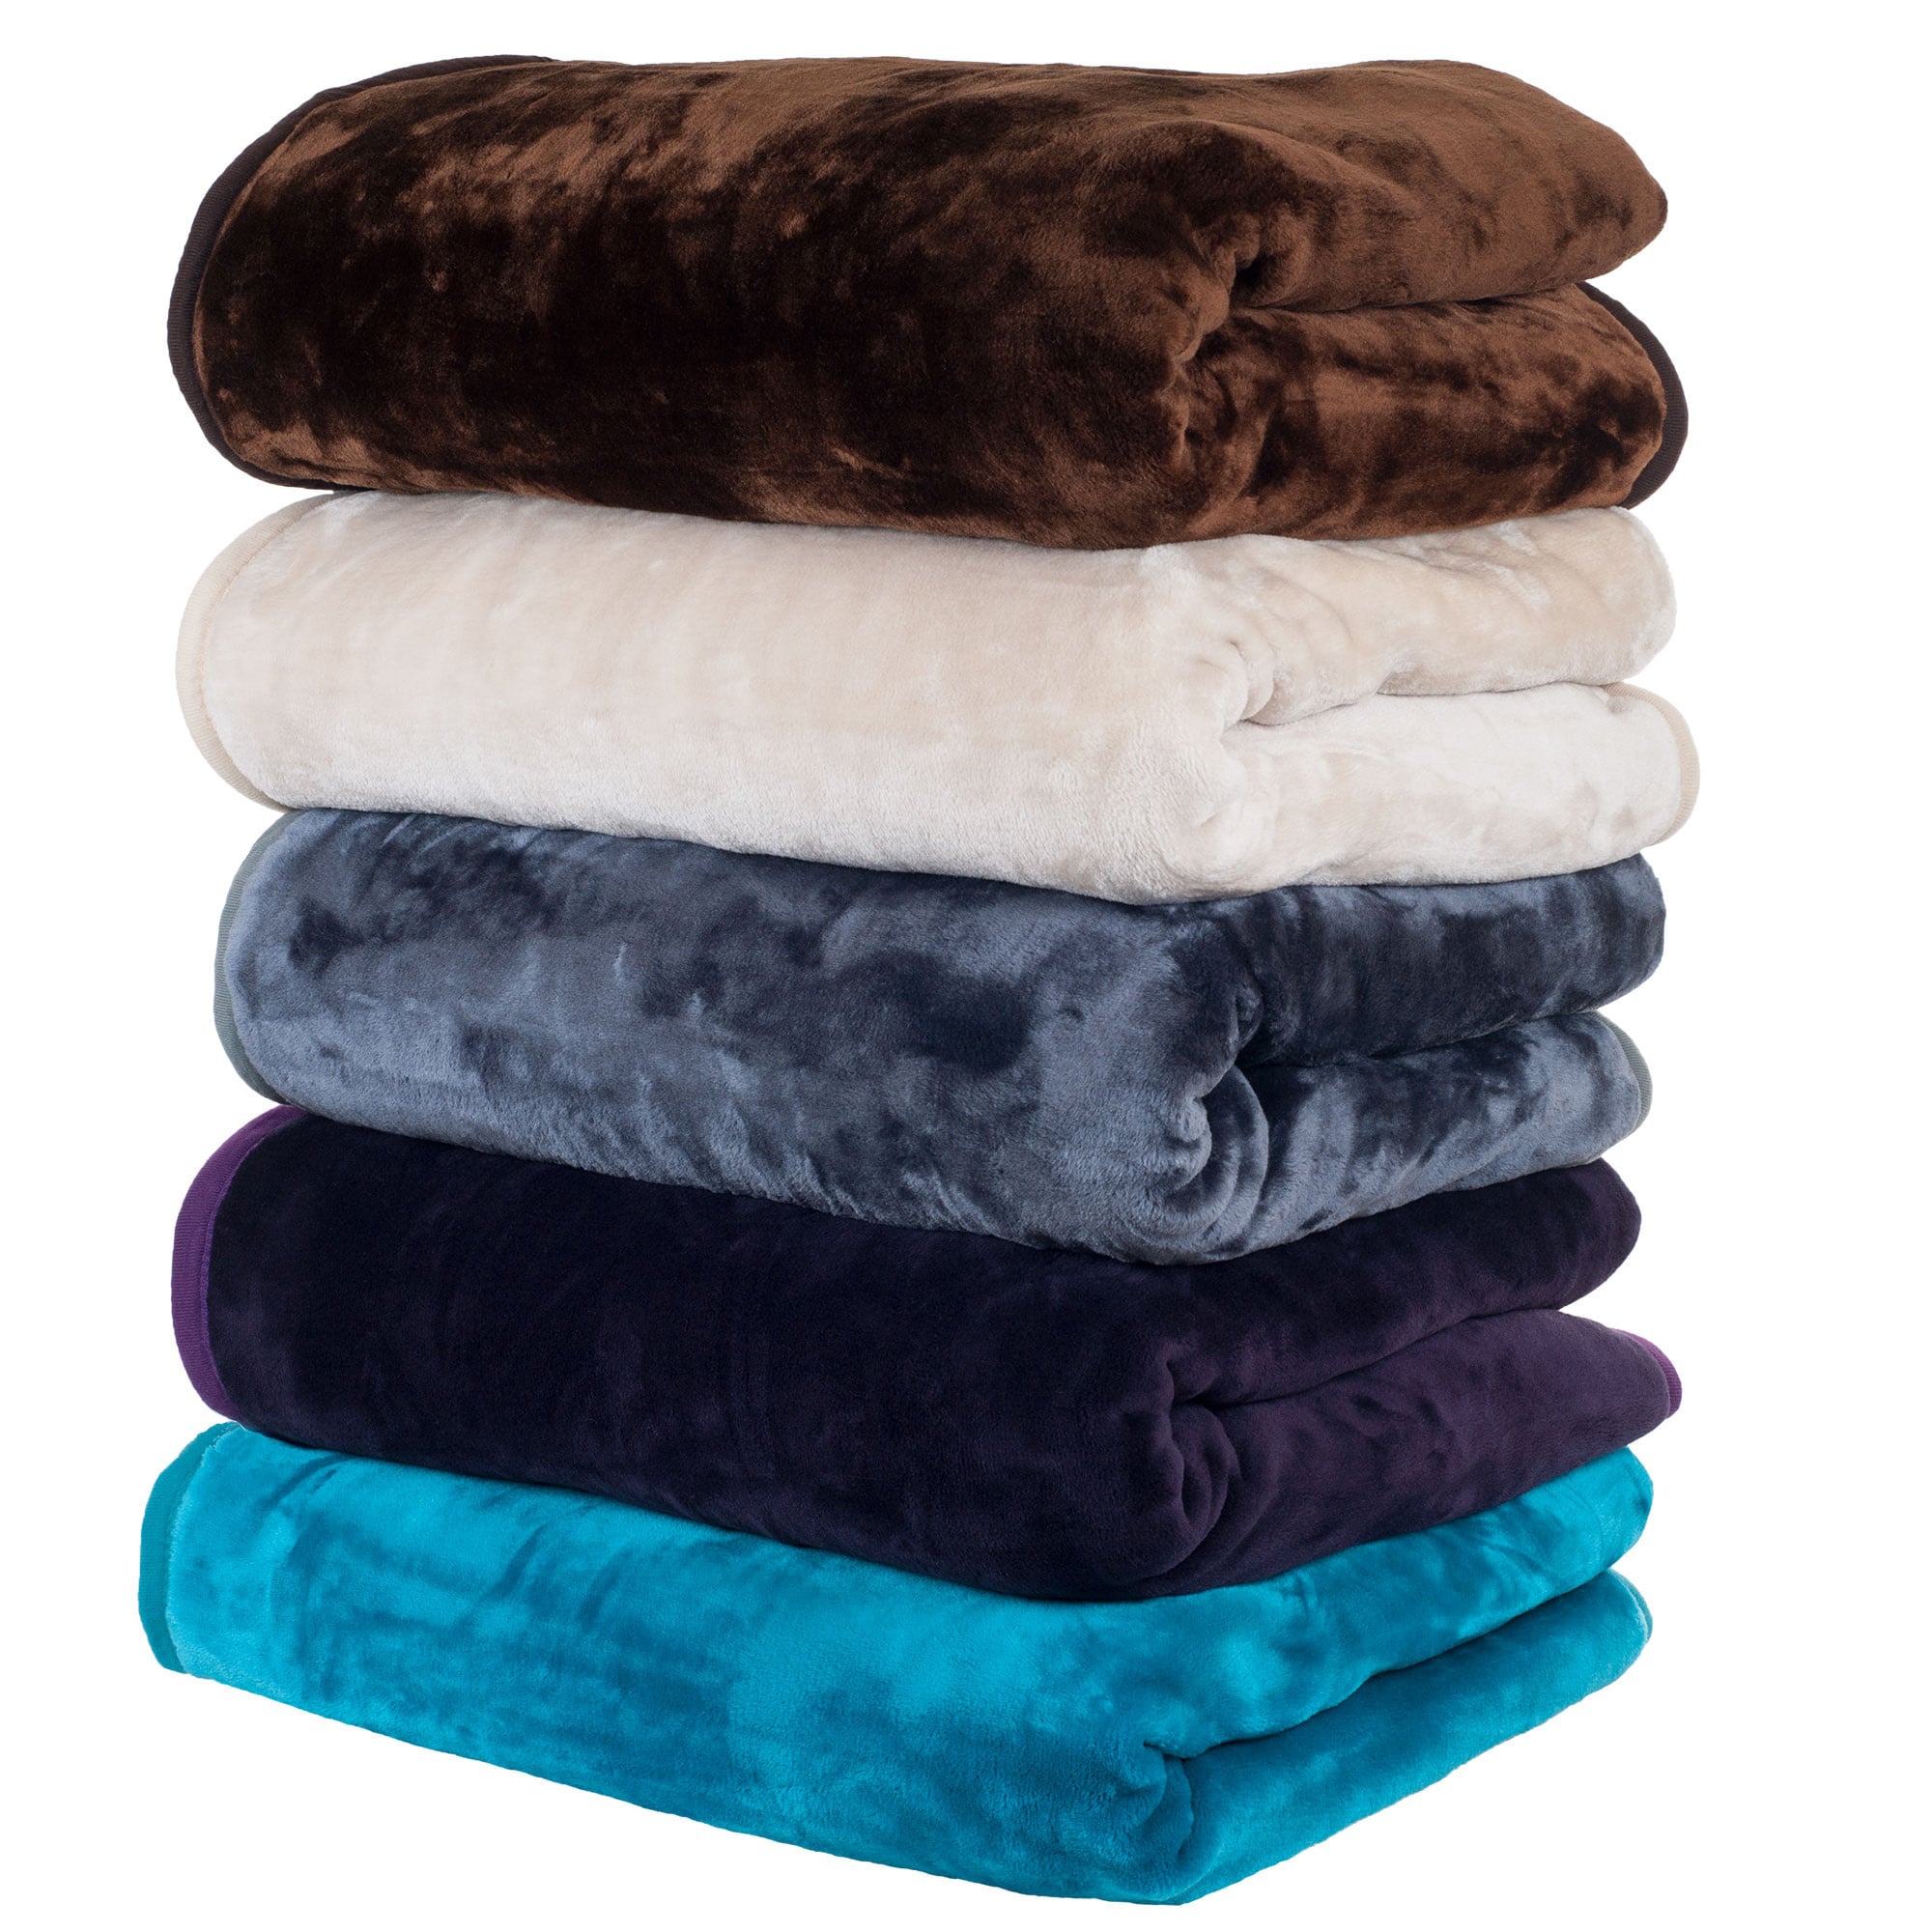 Windsor Home Solid Soft Heavy Thick 8-pound Weighted Plush Mink Blanket